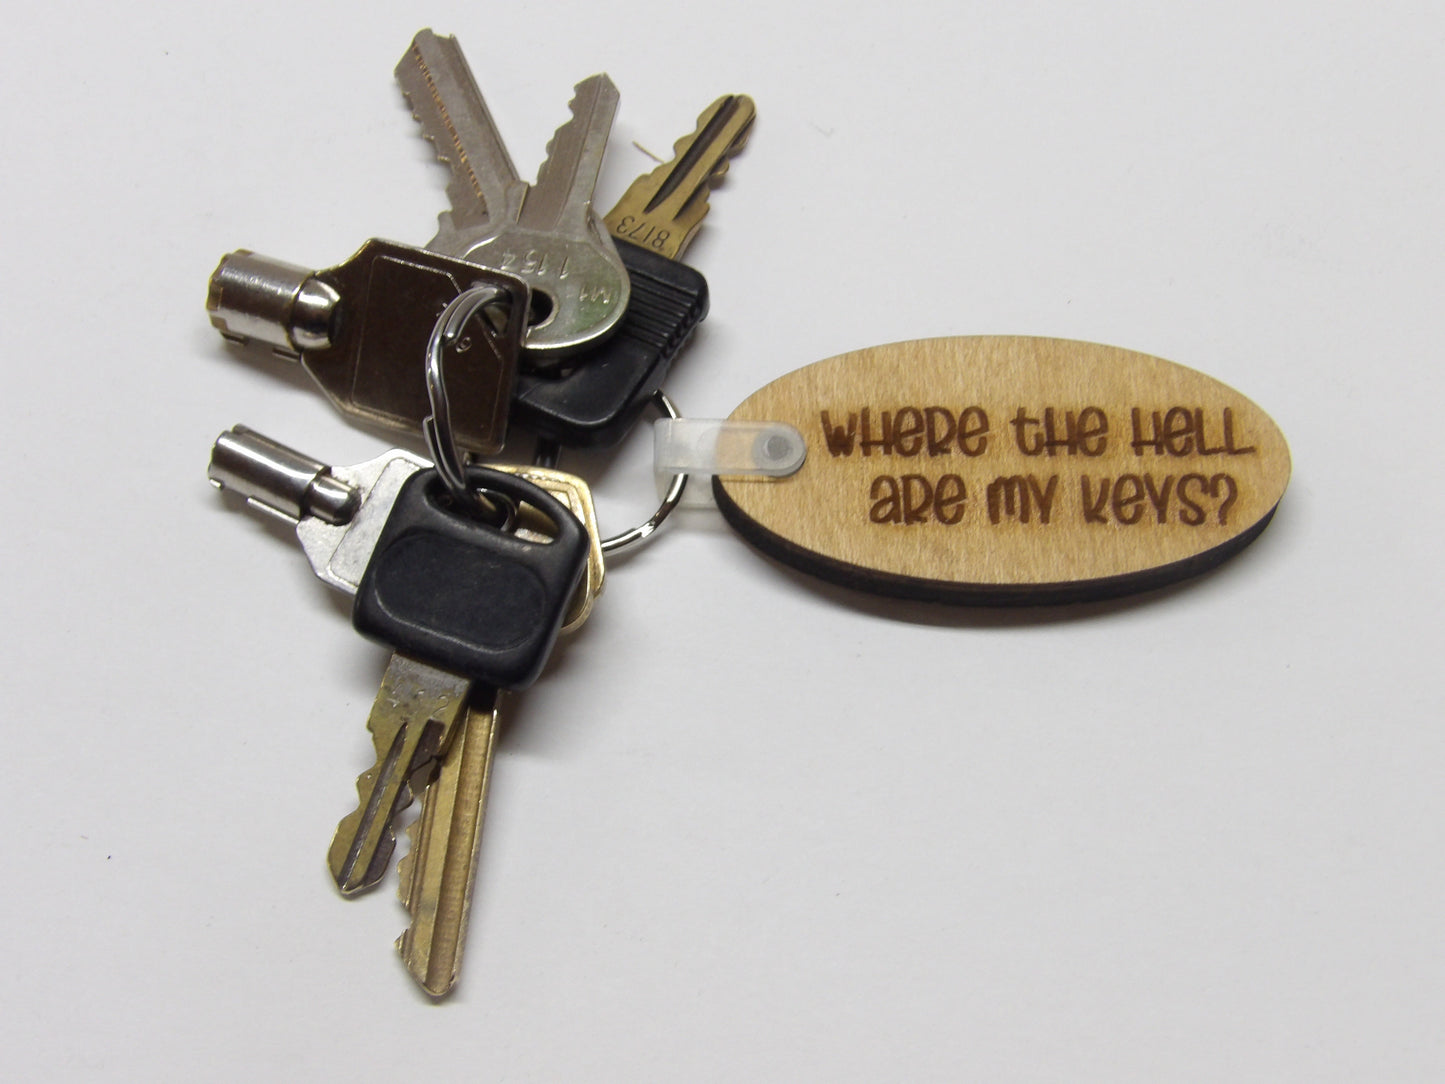 Where the H*ll Are my Keys Keychain